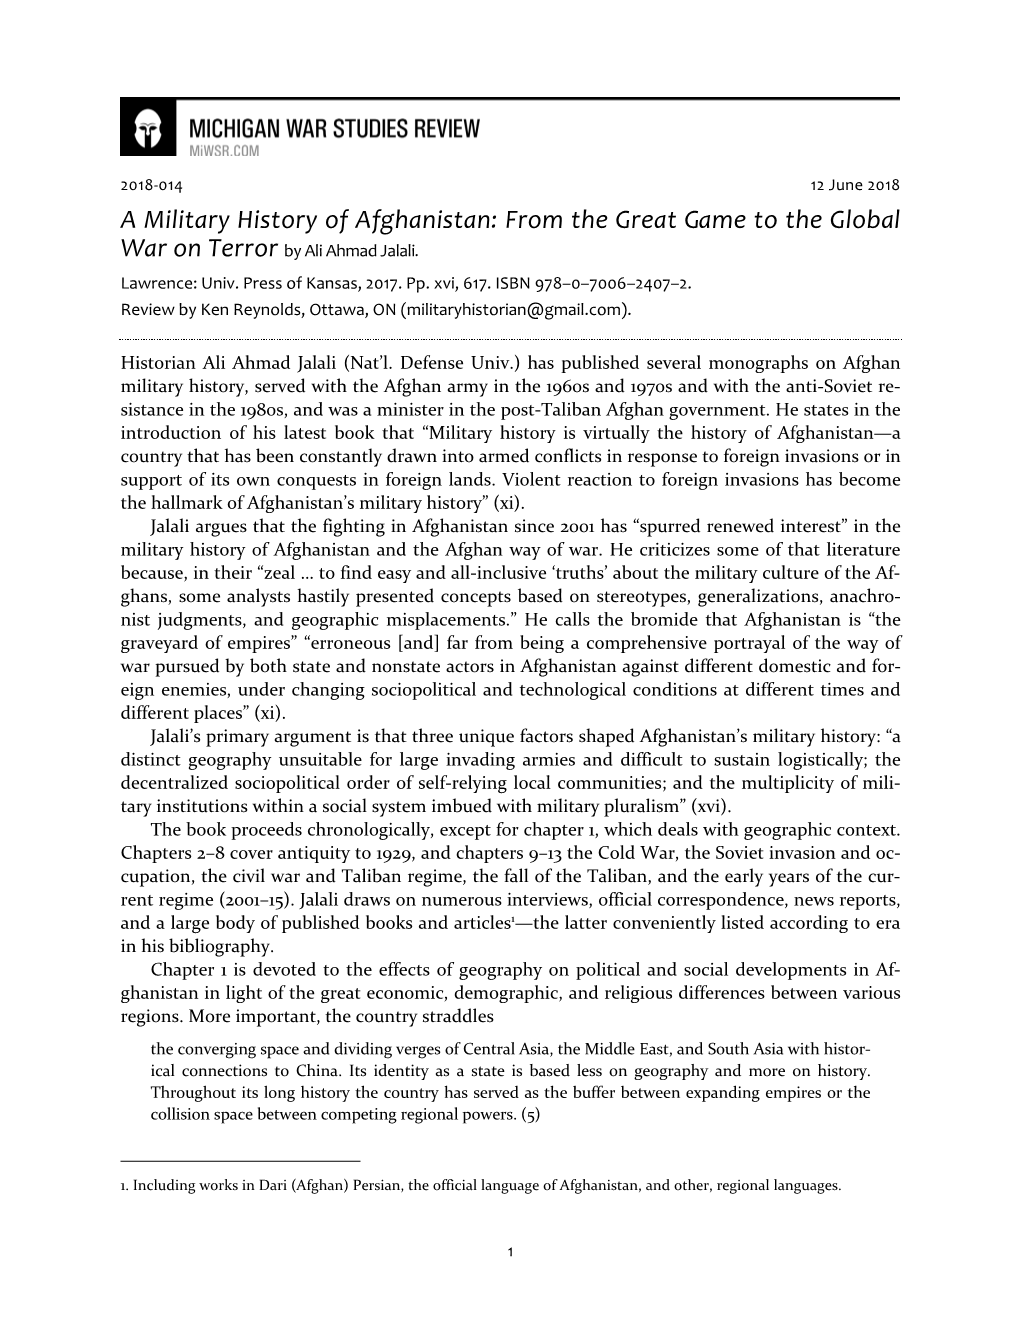 A Military History of Afghanistan: from the Great Game to the Global War on Terror by Ali Ahmad Jalali